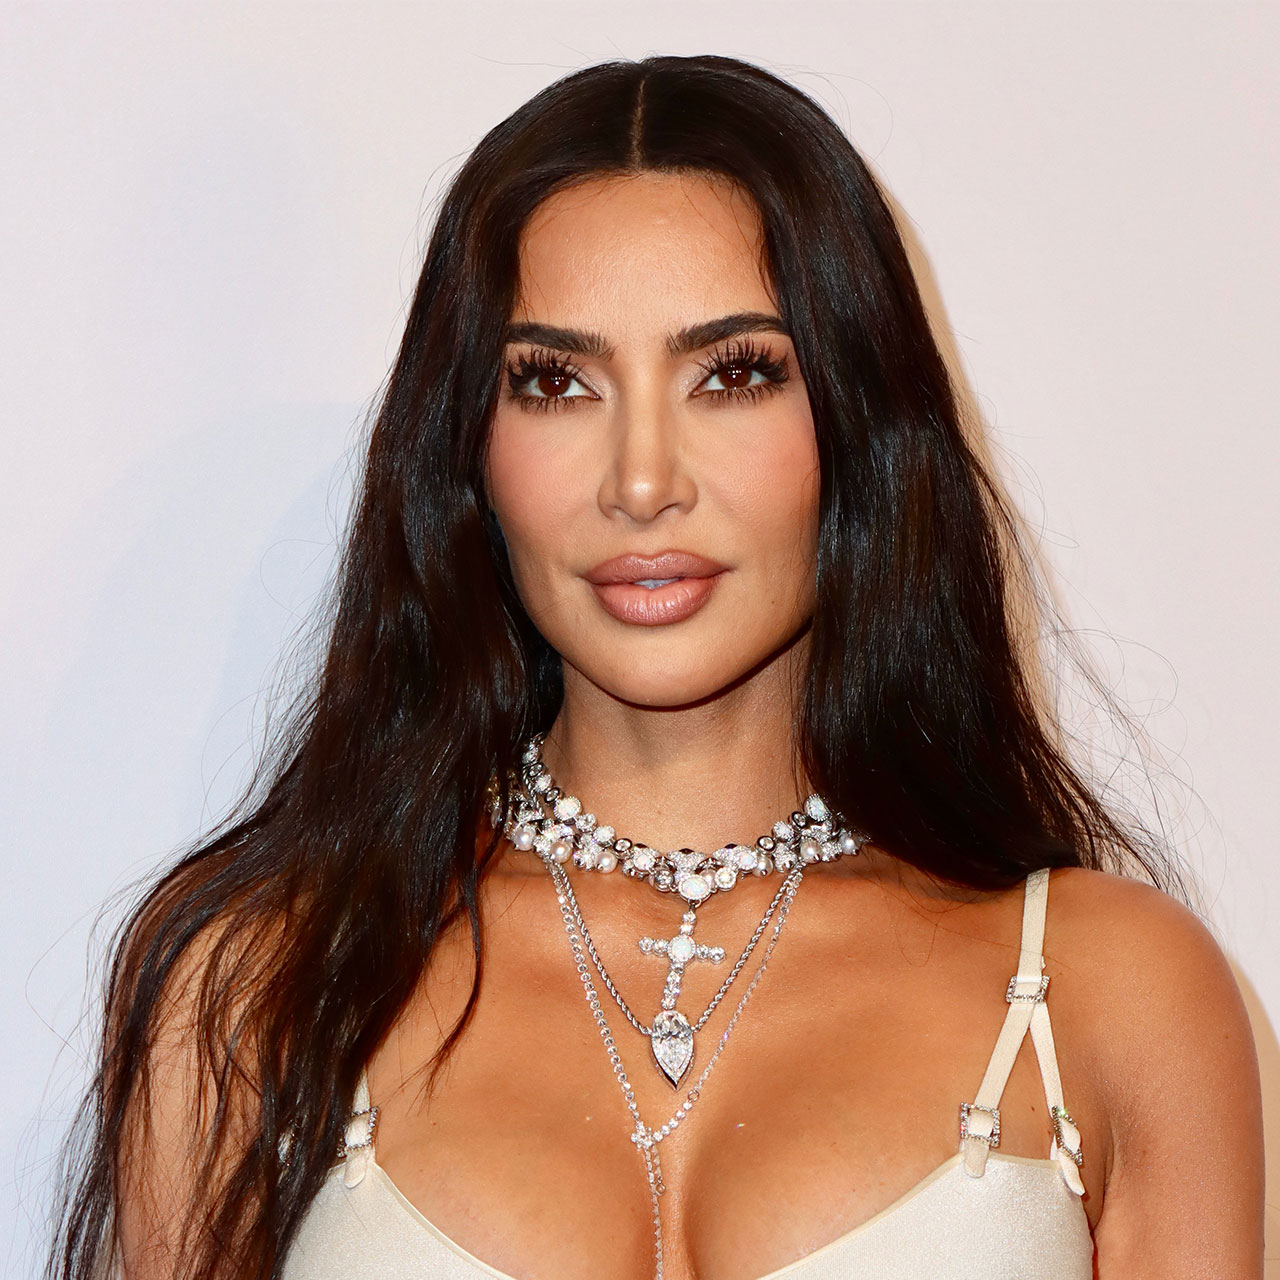 Kim Kardashian showed off her figure in a SKIMS outfit